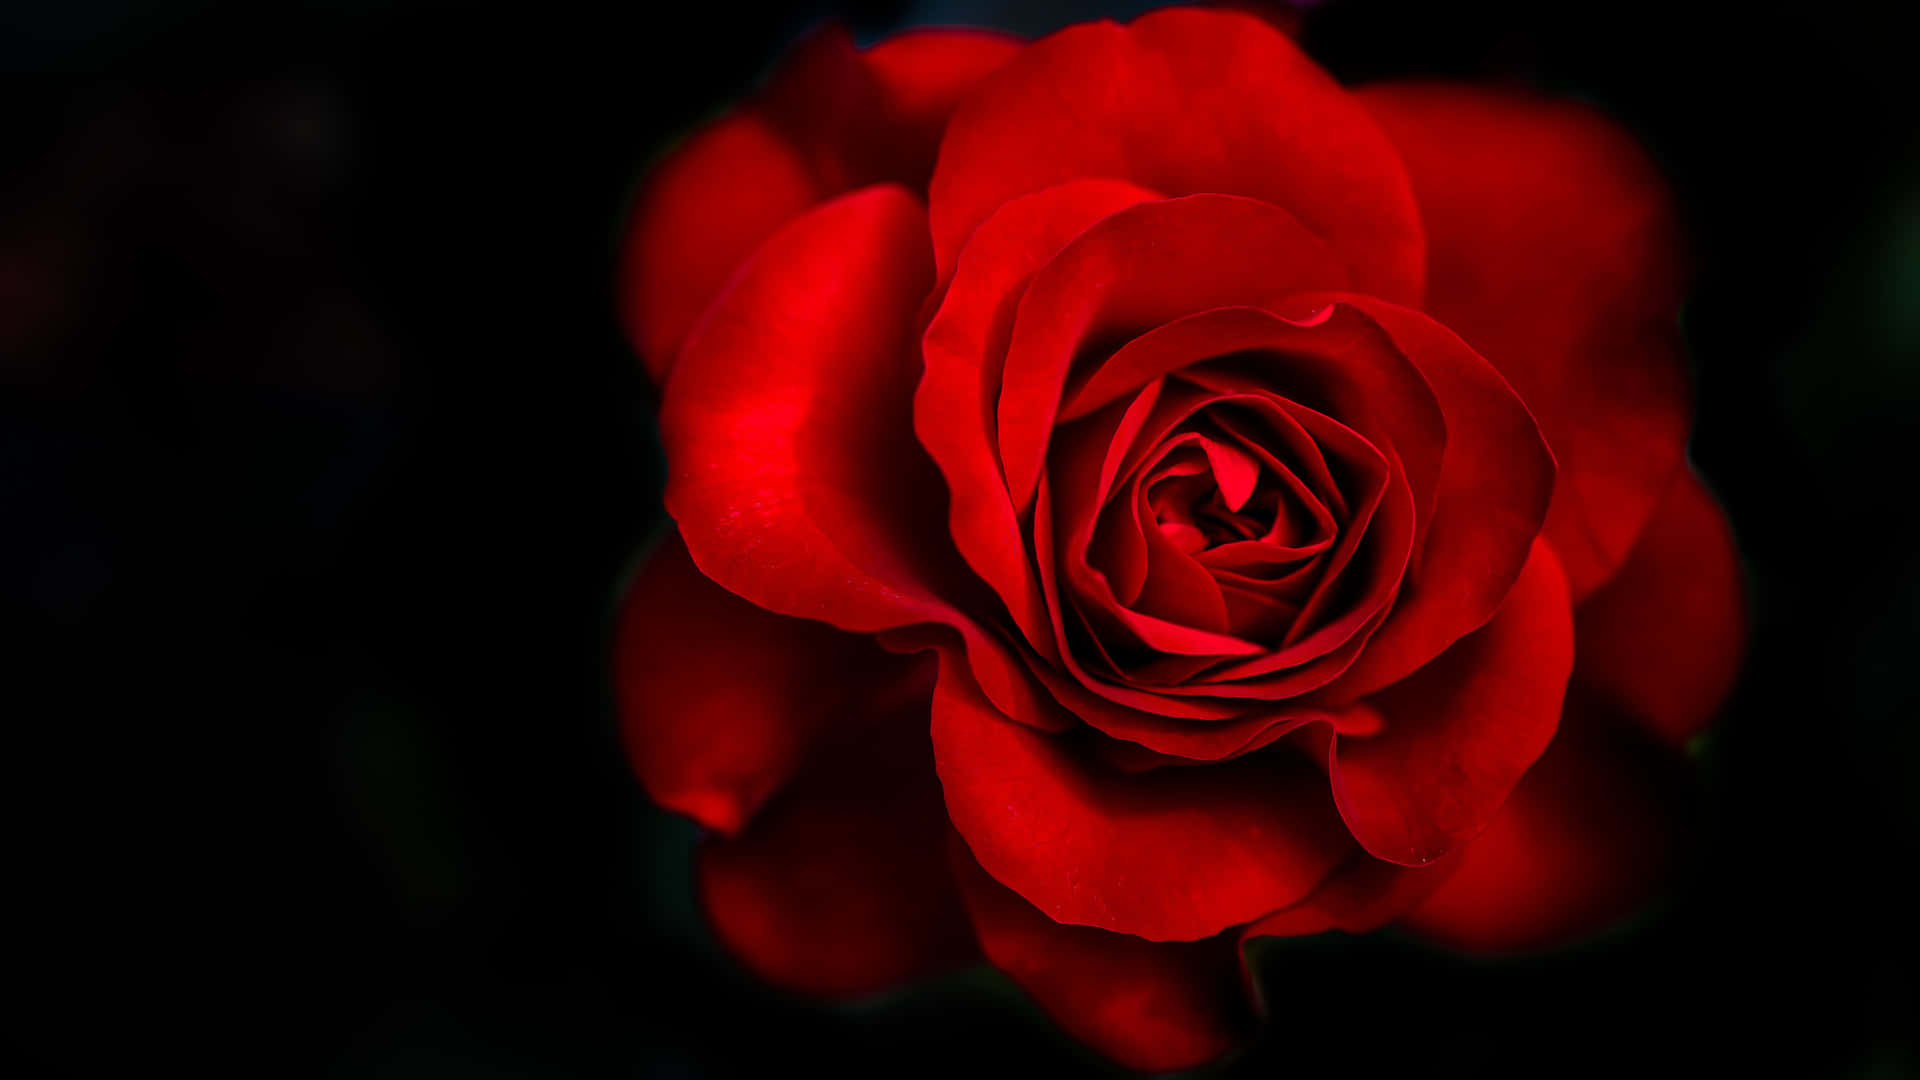 A vibrant red rose to symbolize beauty and romance